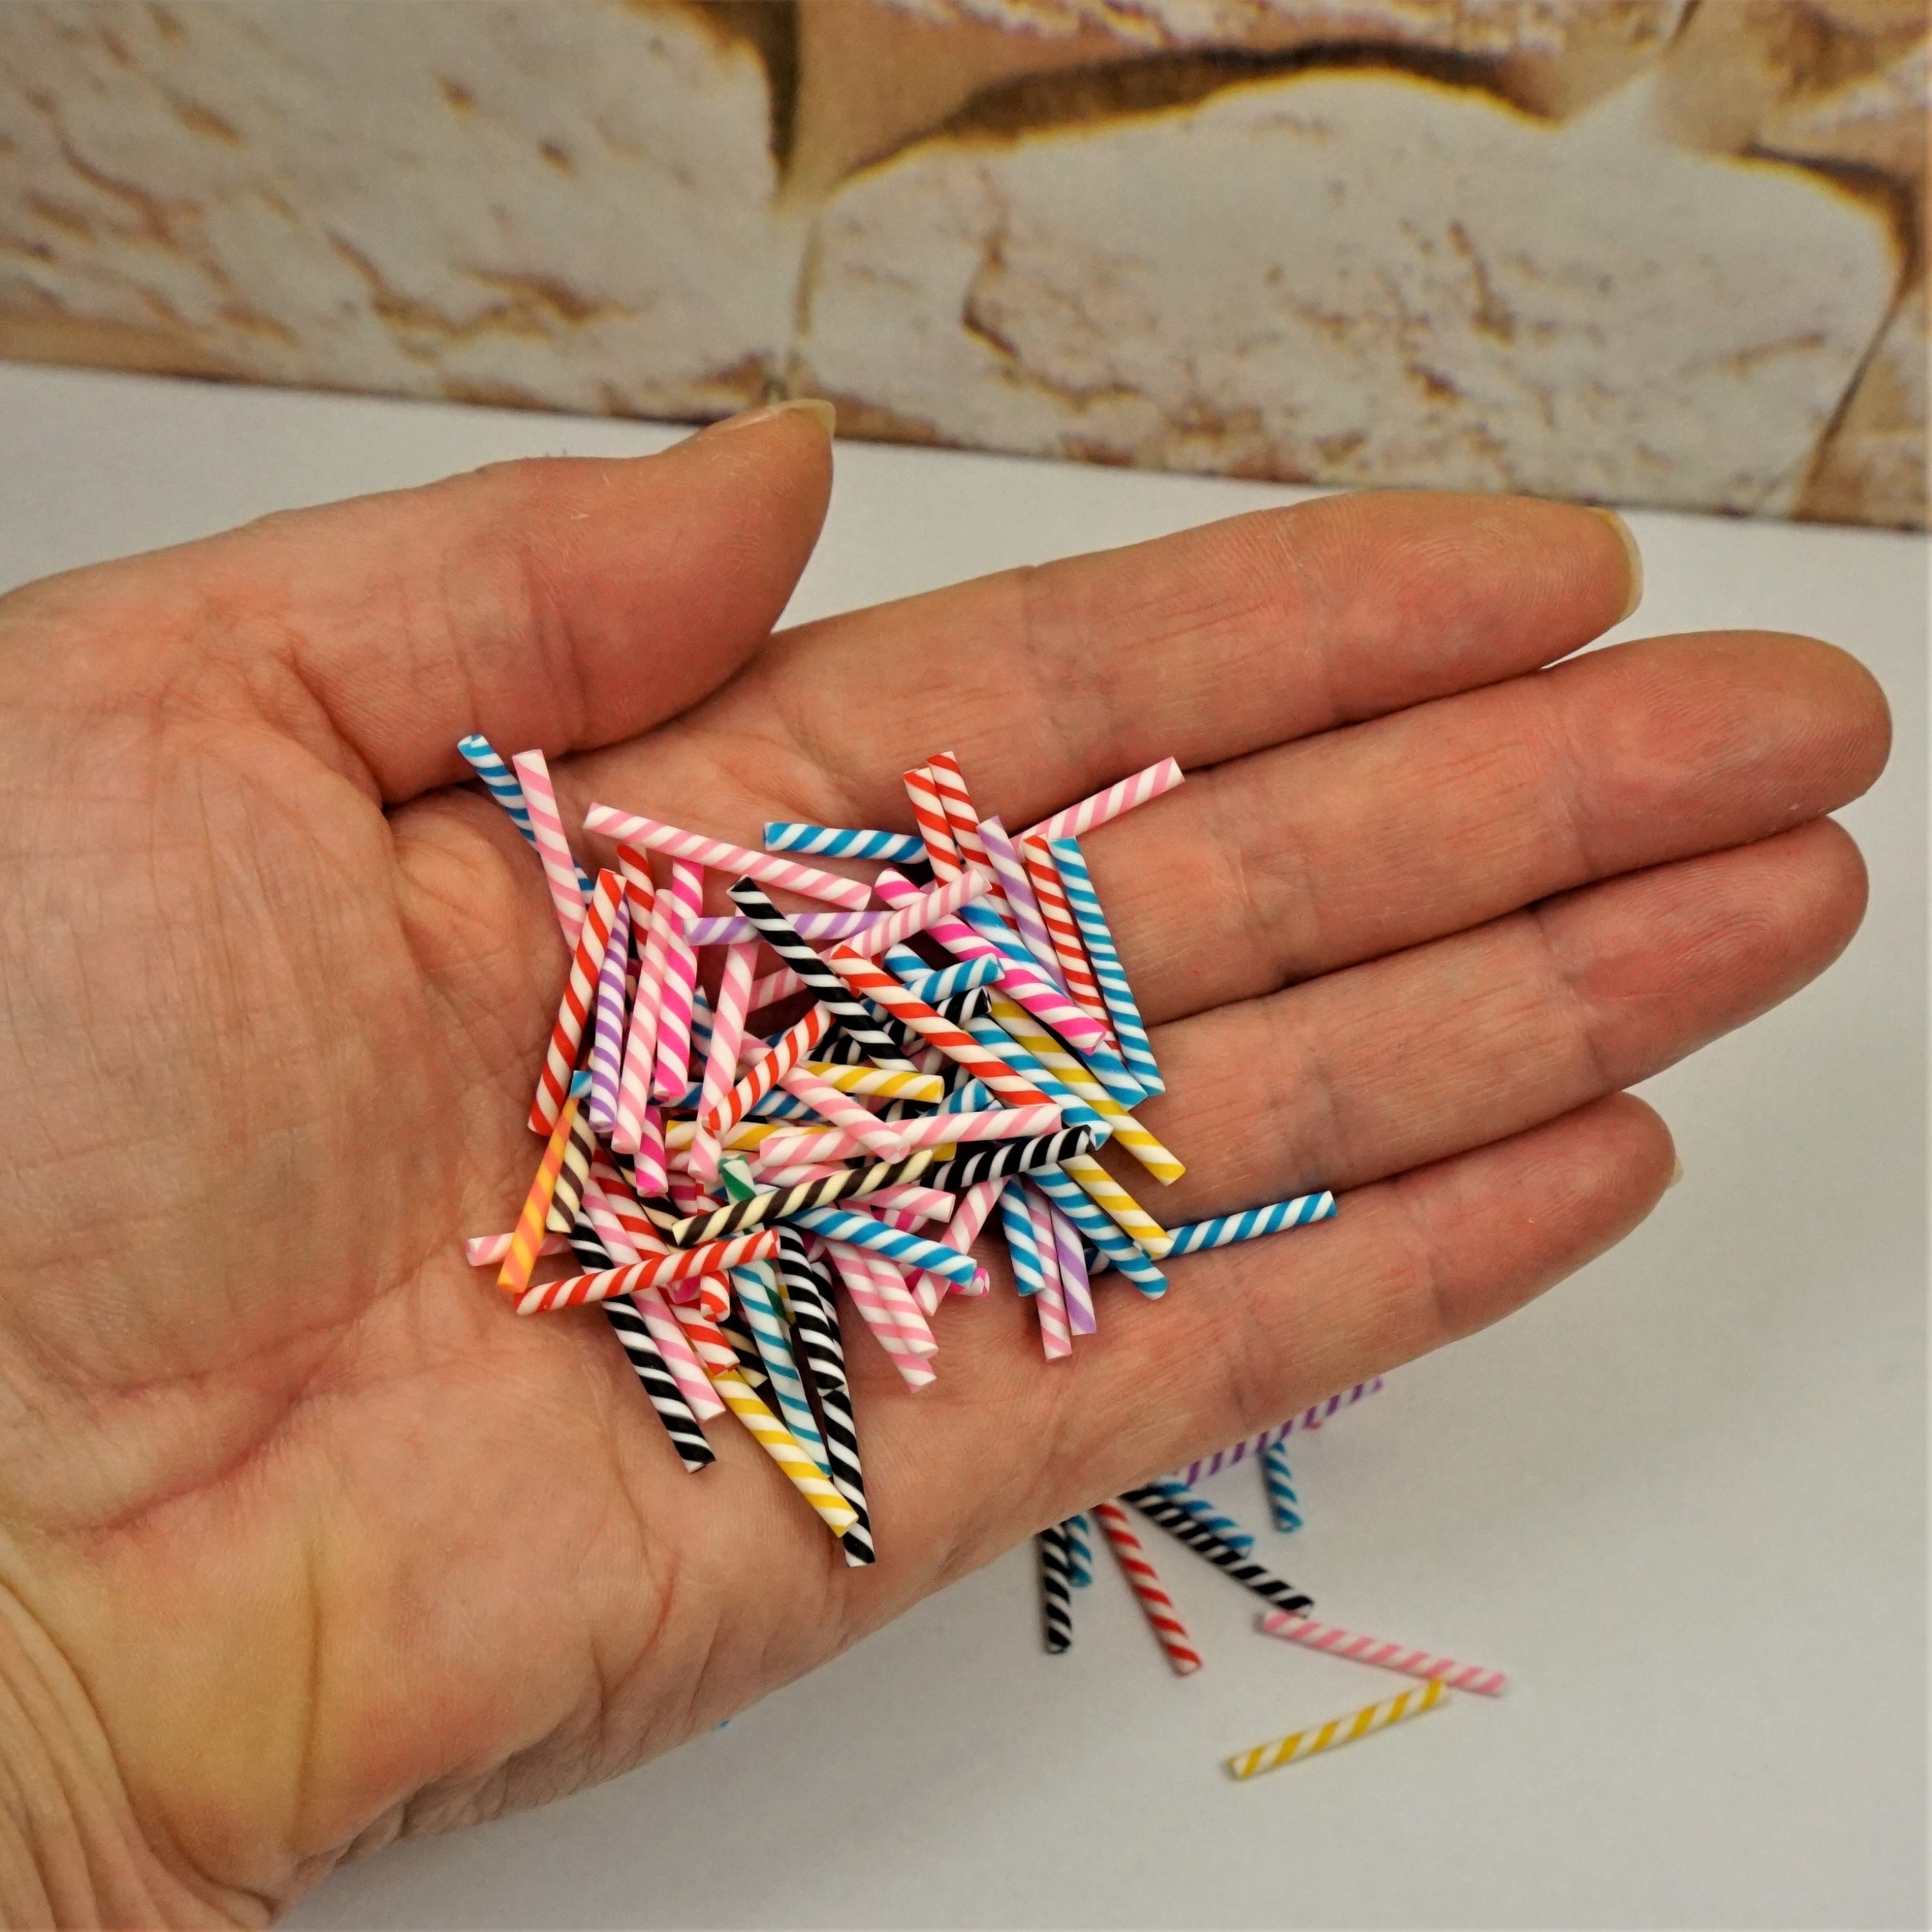 Mini TWISTED CANDY STICKS Cabochons Slime Charms Multicolor 